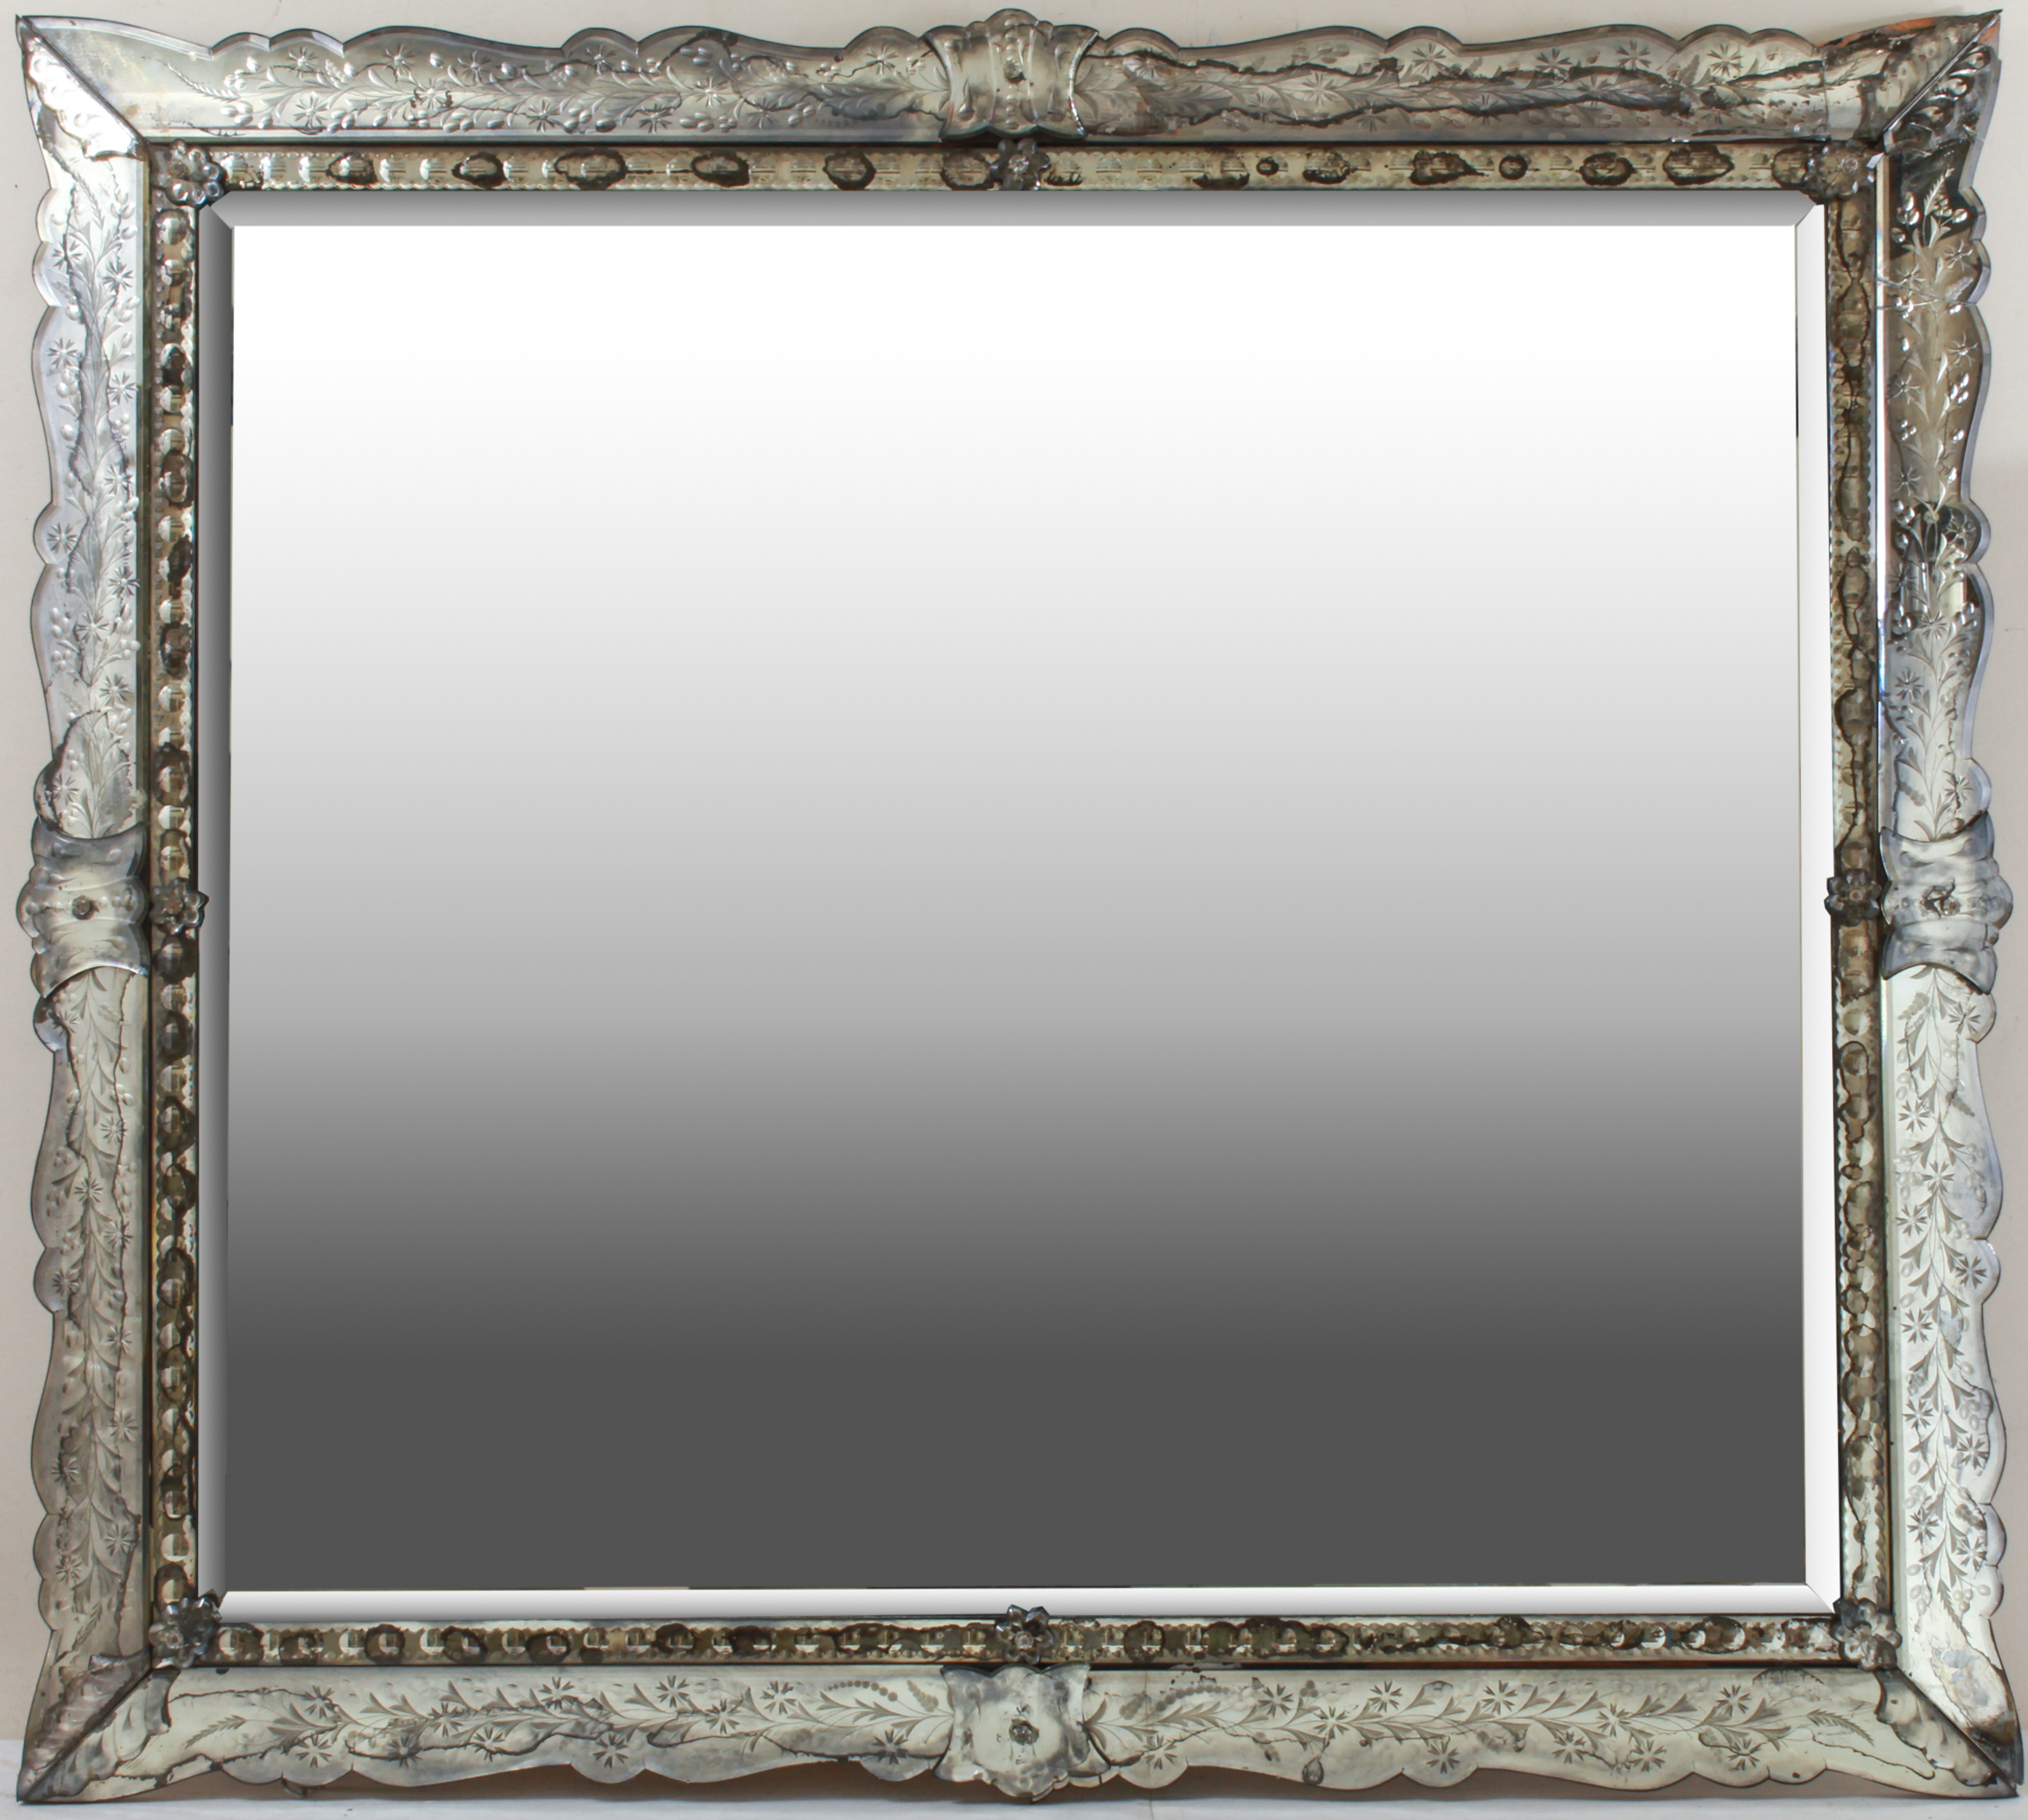 VENETIAN ETCHED GLASS WALL MIRROR 3c3dce